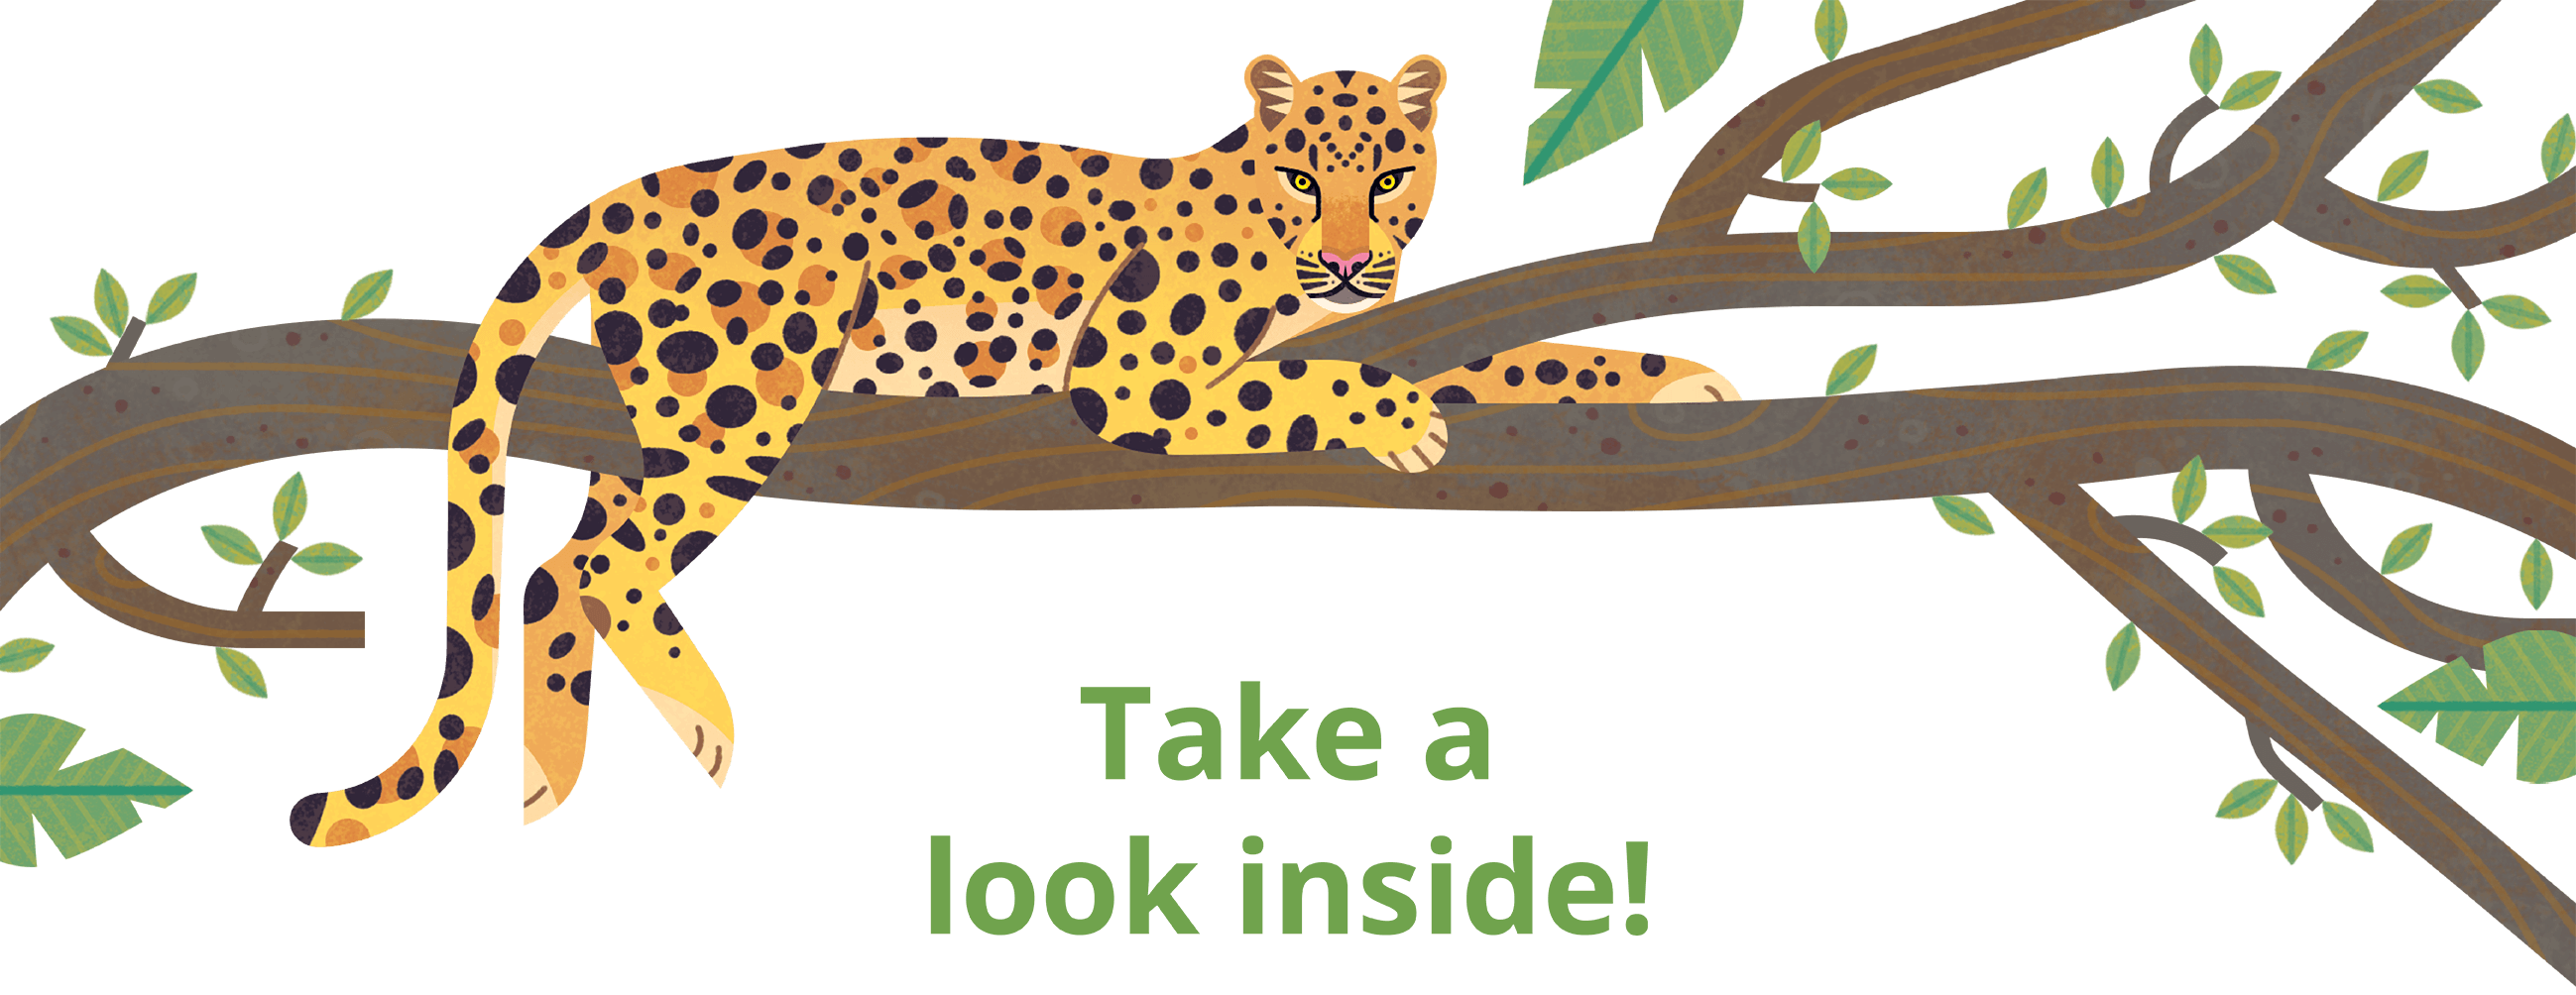 Illustration of a leopard on a branch